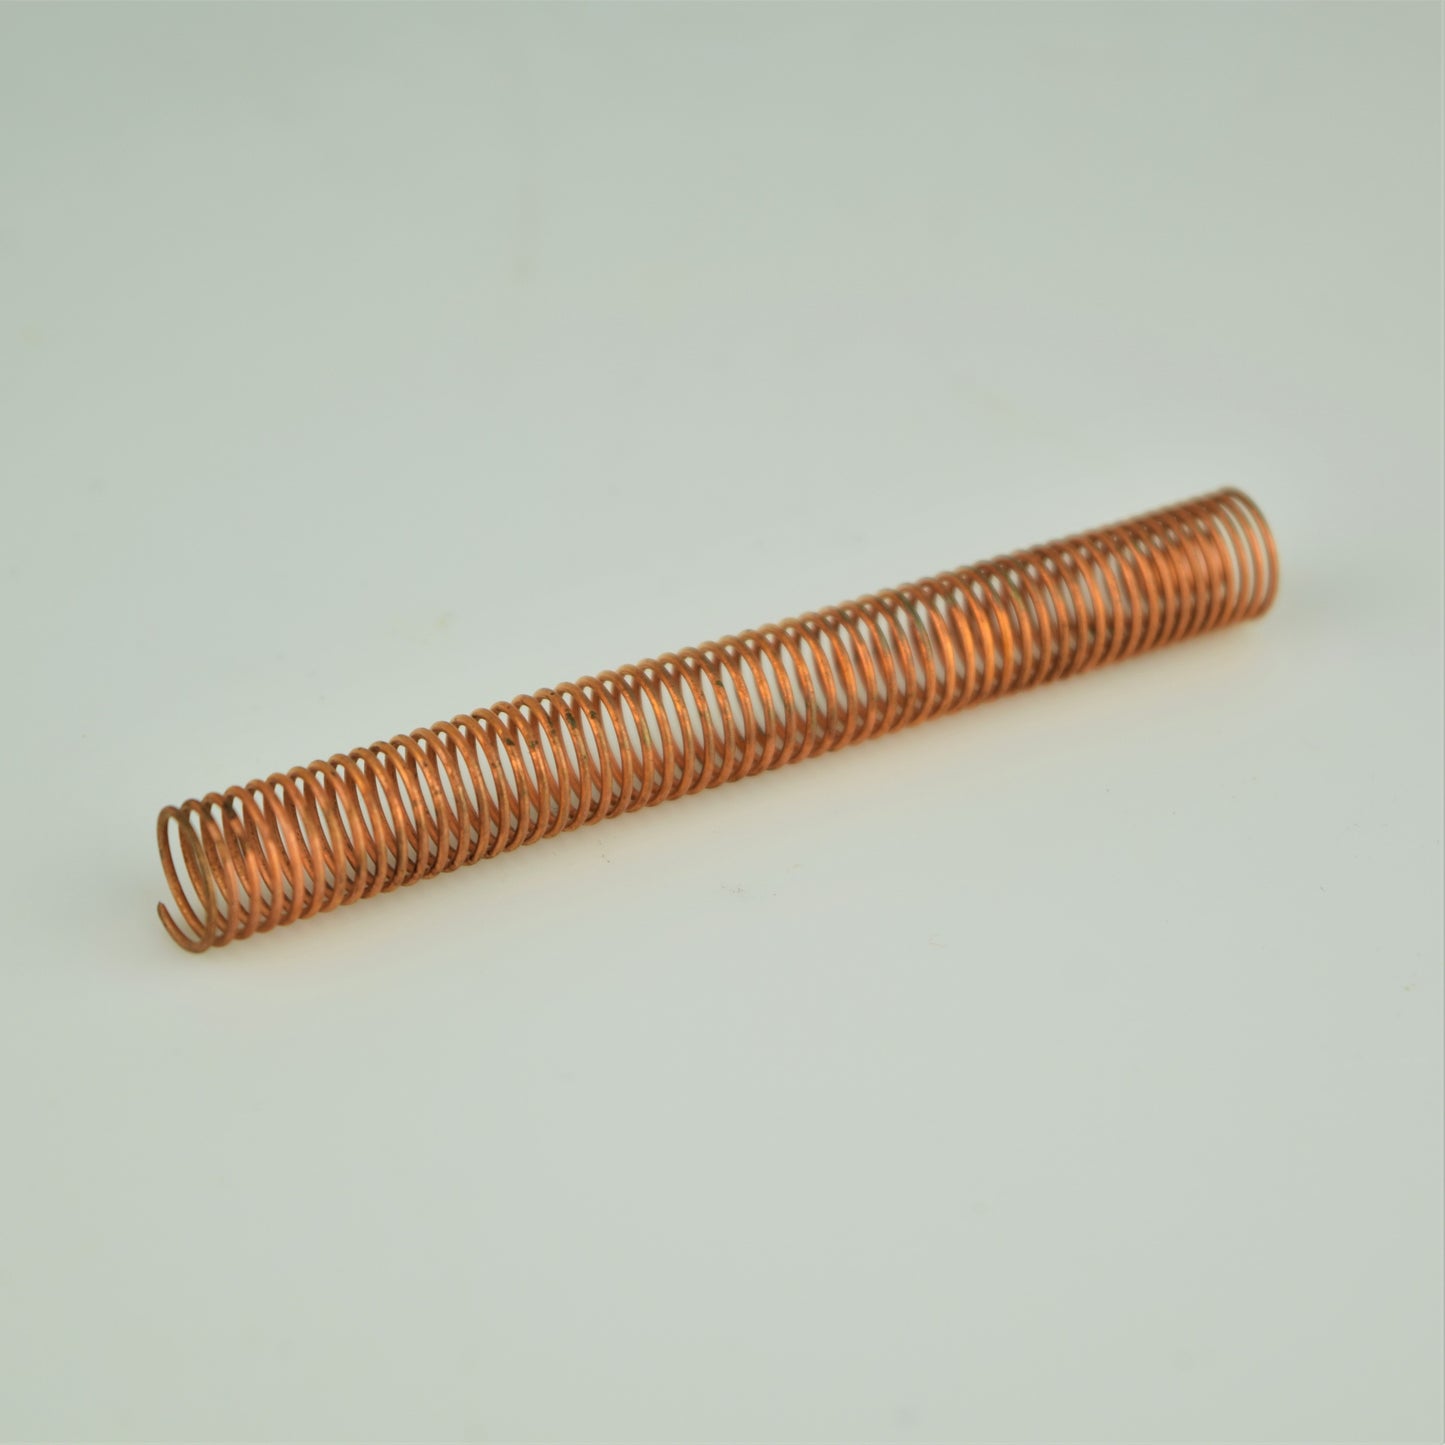 Western Electric - 202 Plunger Spring